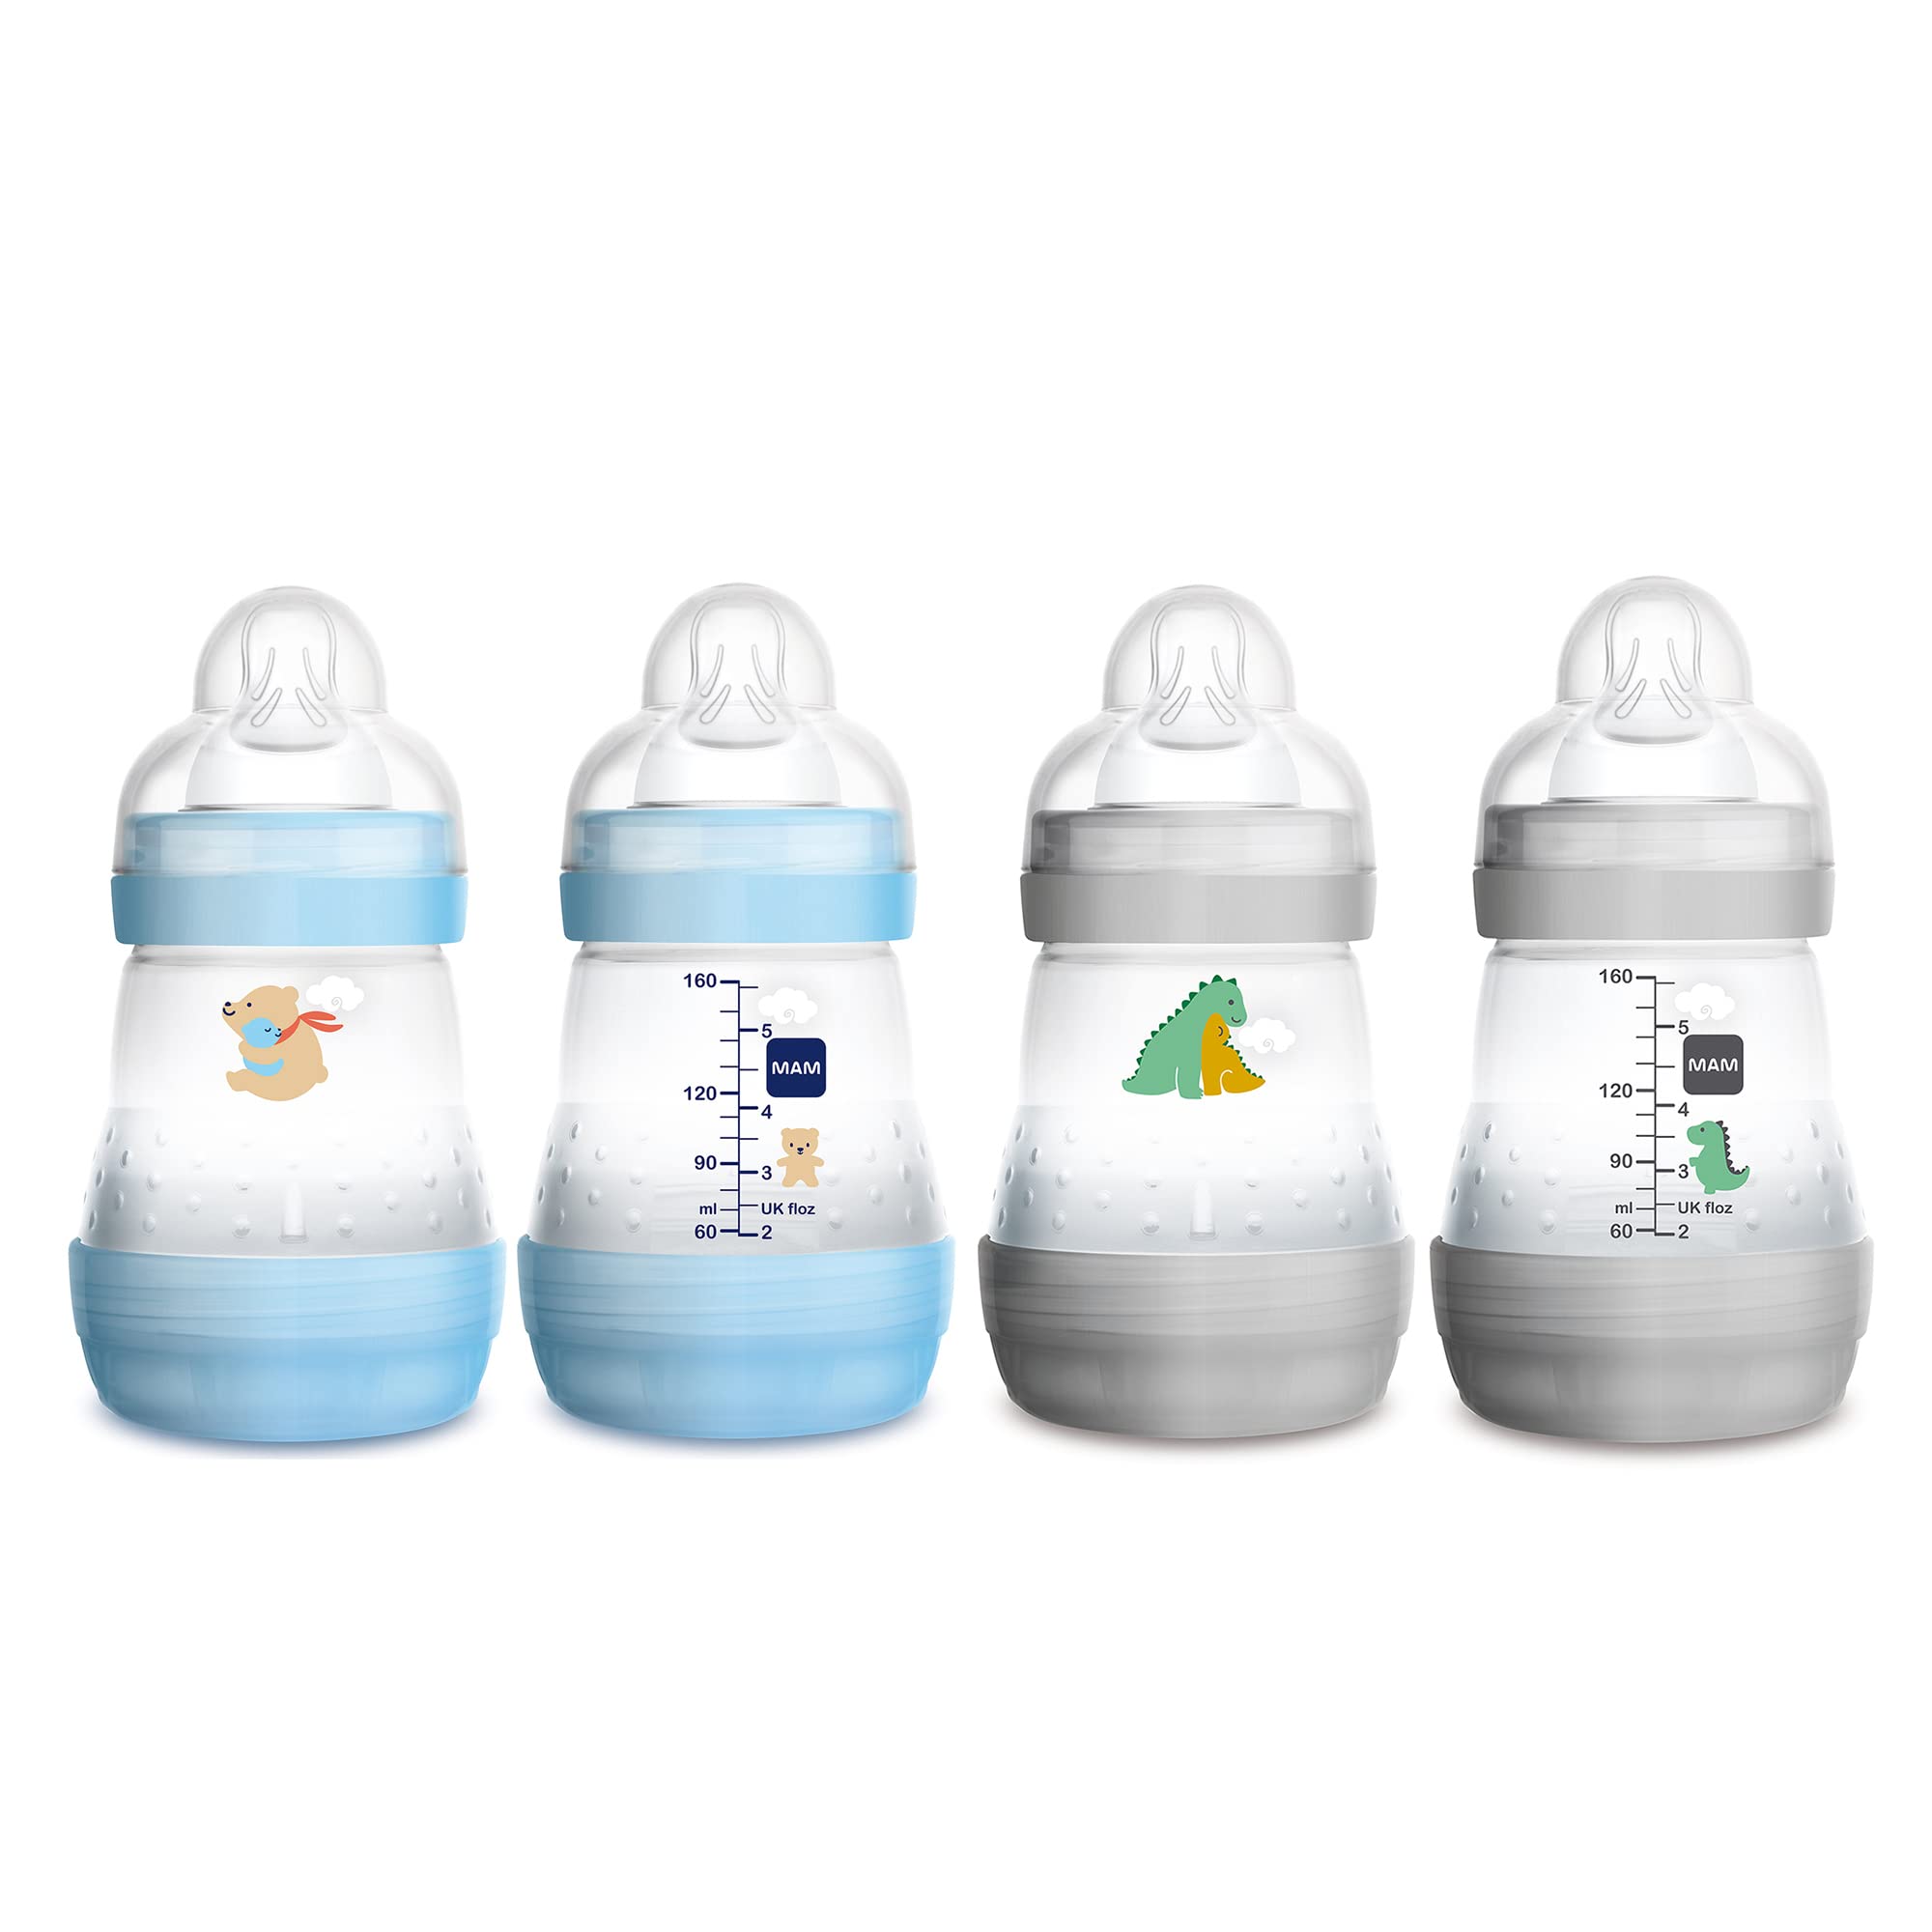 MAM Easy Start Anti-Colic Slow Flow Bottles 5 oz (4-Count) Gray and Blue